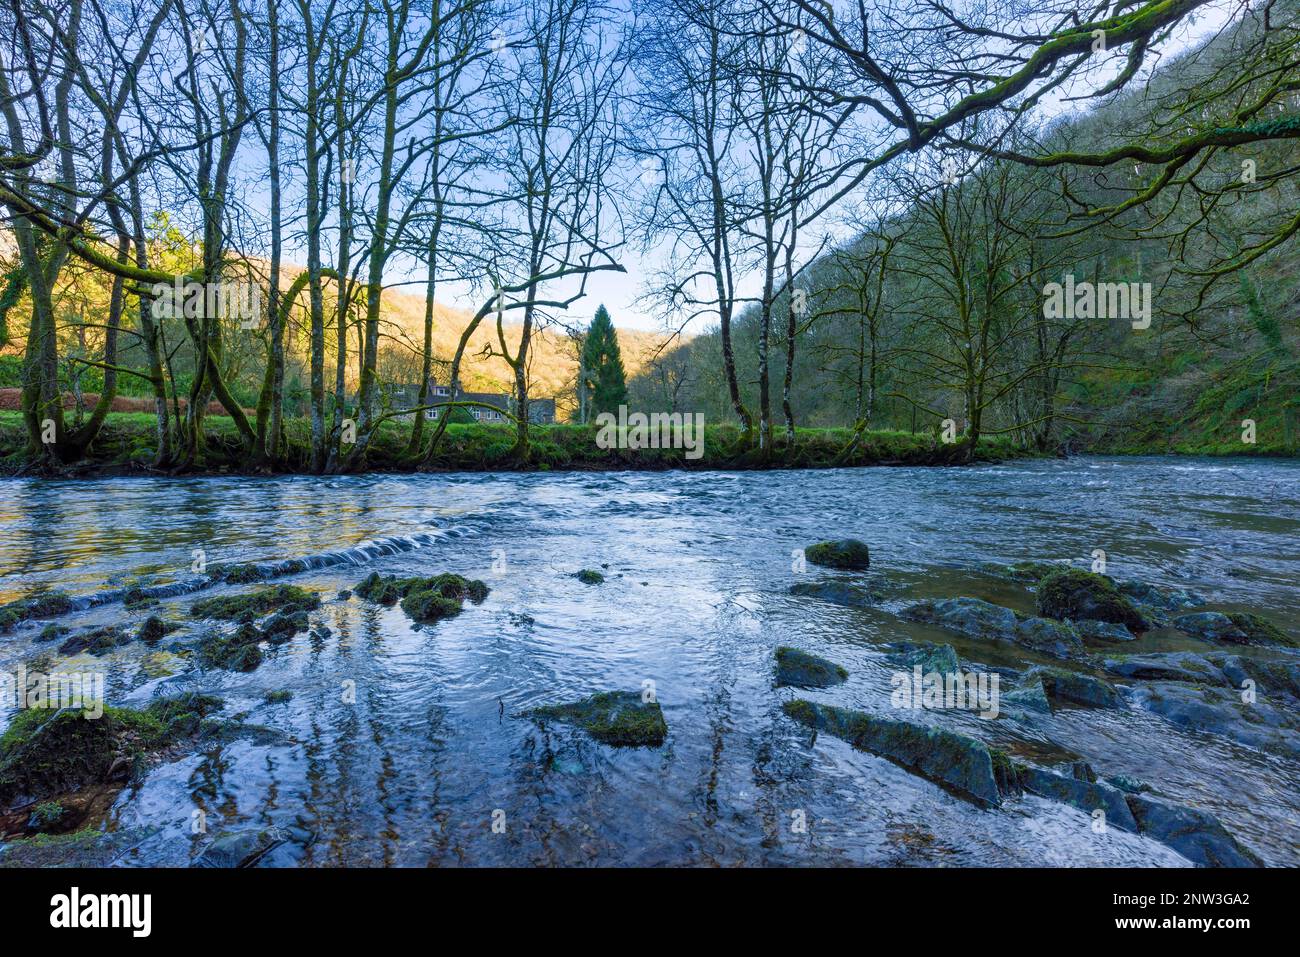 The River Barle on the edge of Burridge Woods near Dulverton in the Exmoor National Park, Somerset, England. Stock Photo